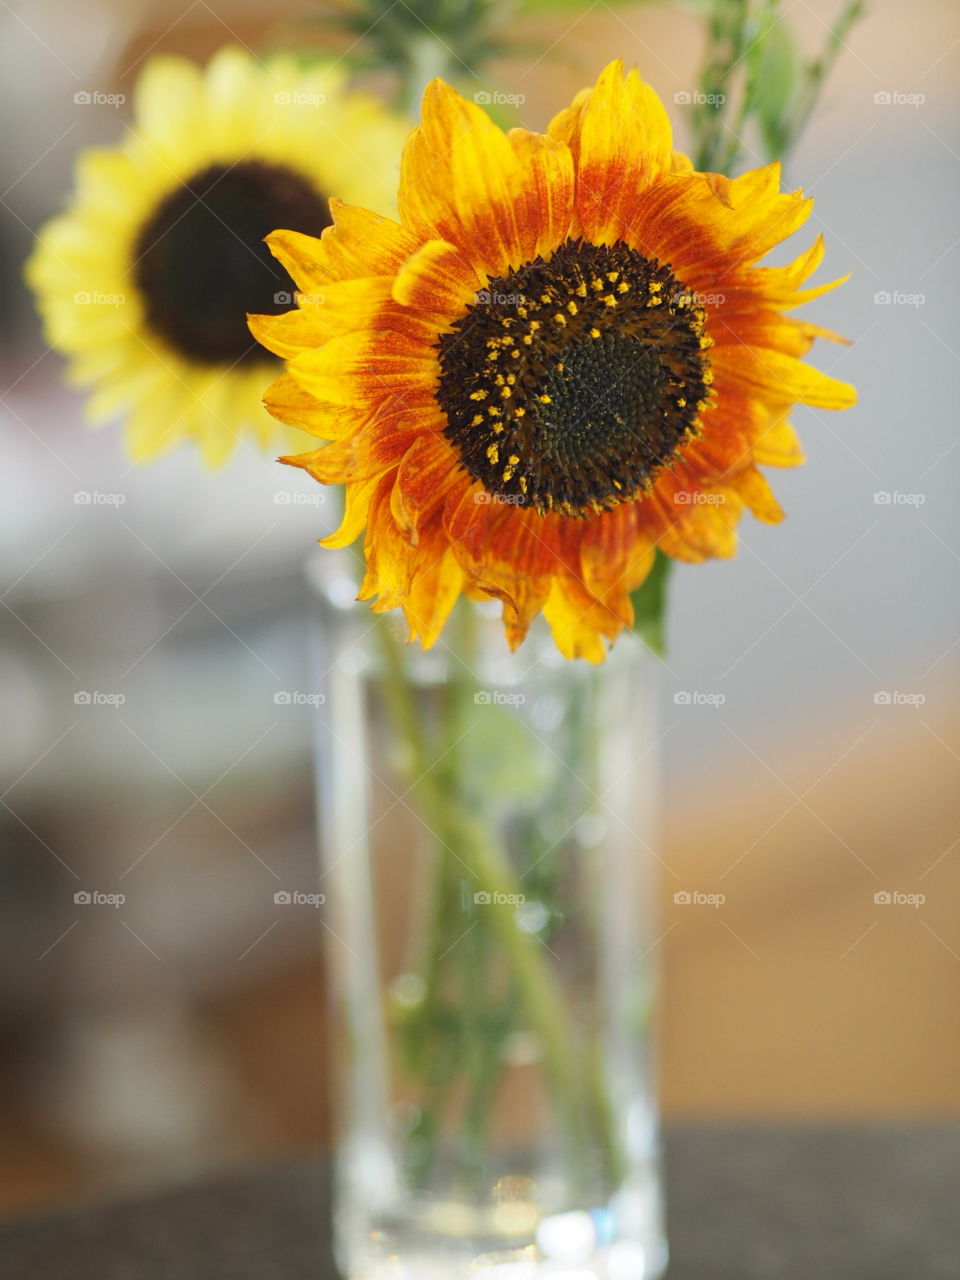 Cut Sunflowers in a vase with a very shallow depth of field and vivid colors